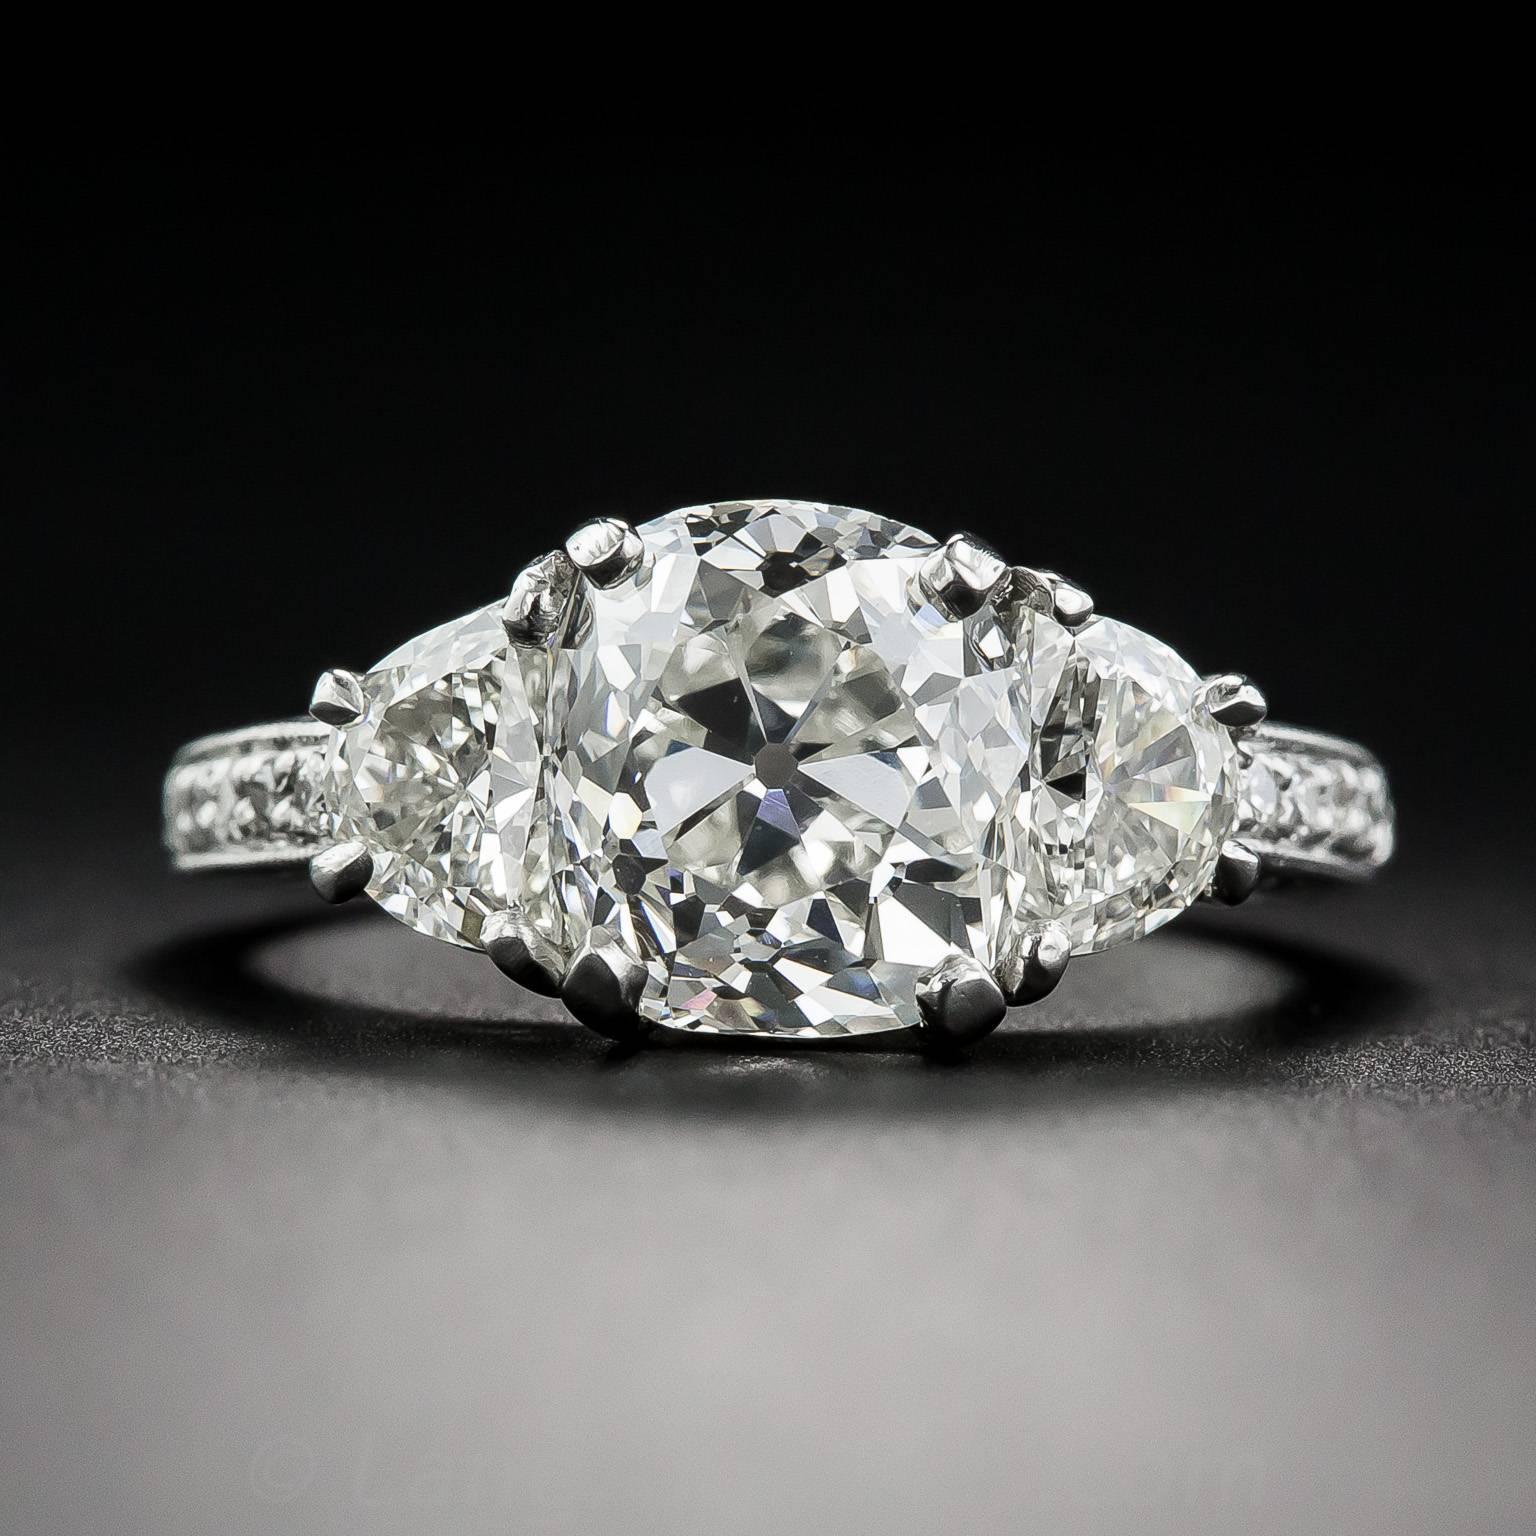 A gorgeous, bright white and beautiful 3.03 carat antique cushion-cut diamond, of early twentieth century vintage, has found a fabulous new home between a matched pair of half-moon diamonds, together weighing an additional 1 carat. The scintillating